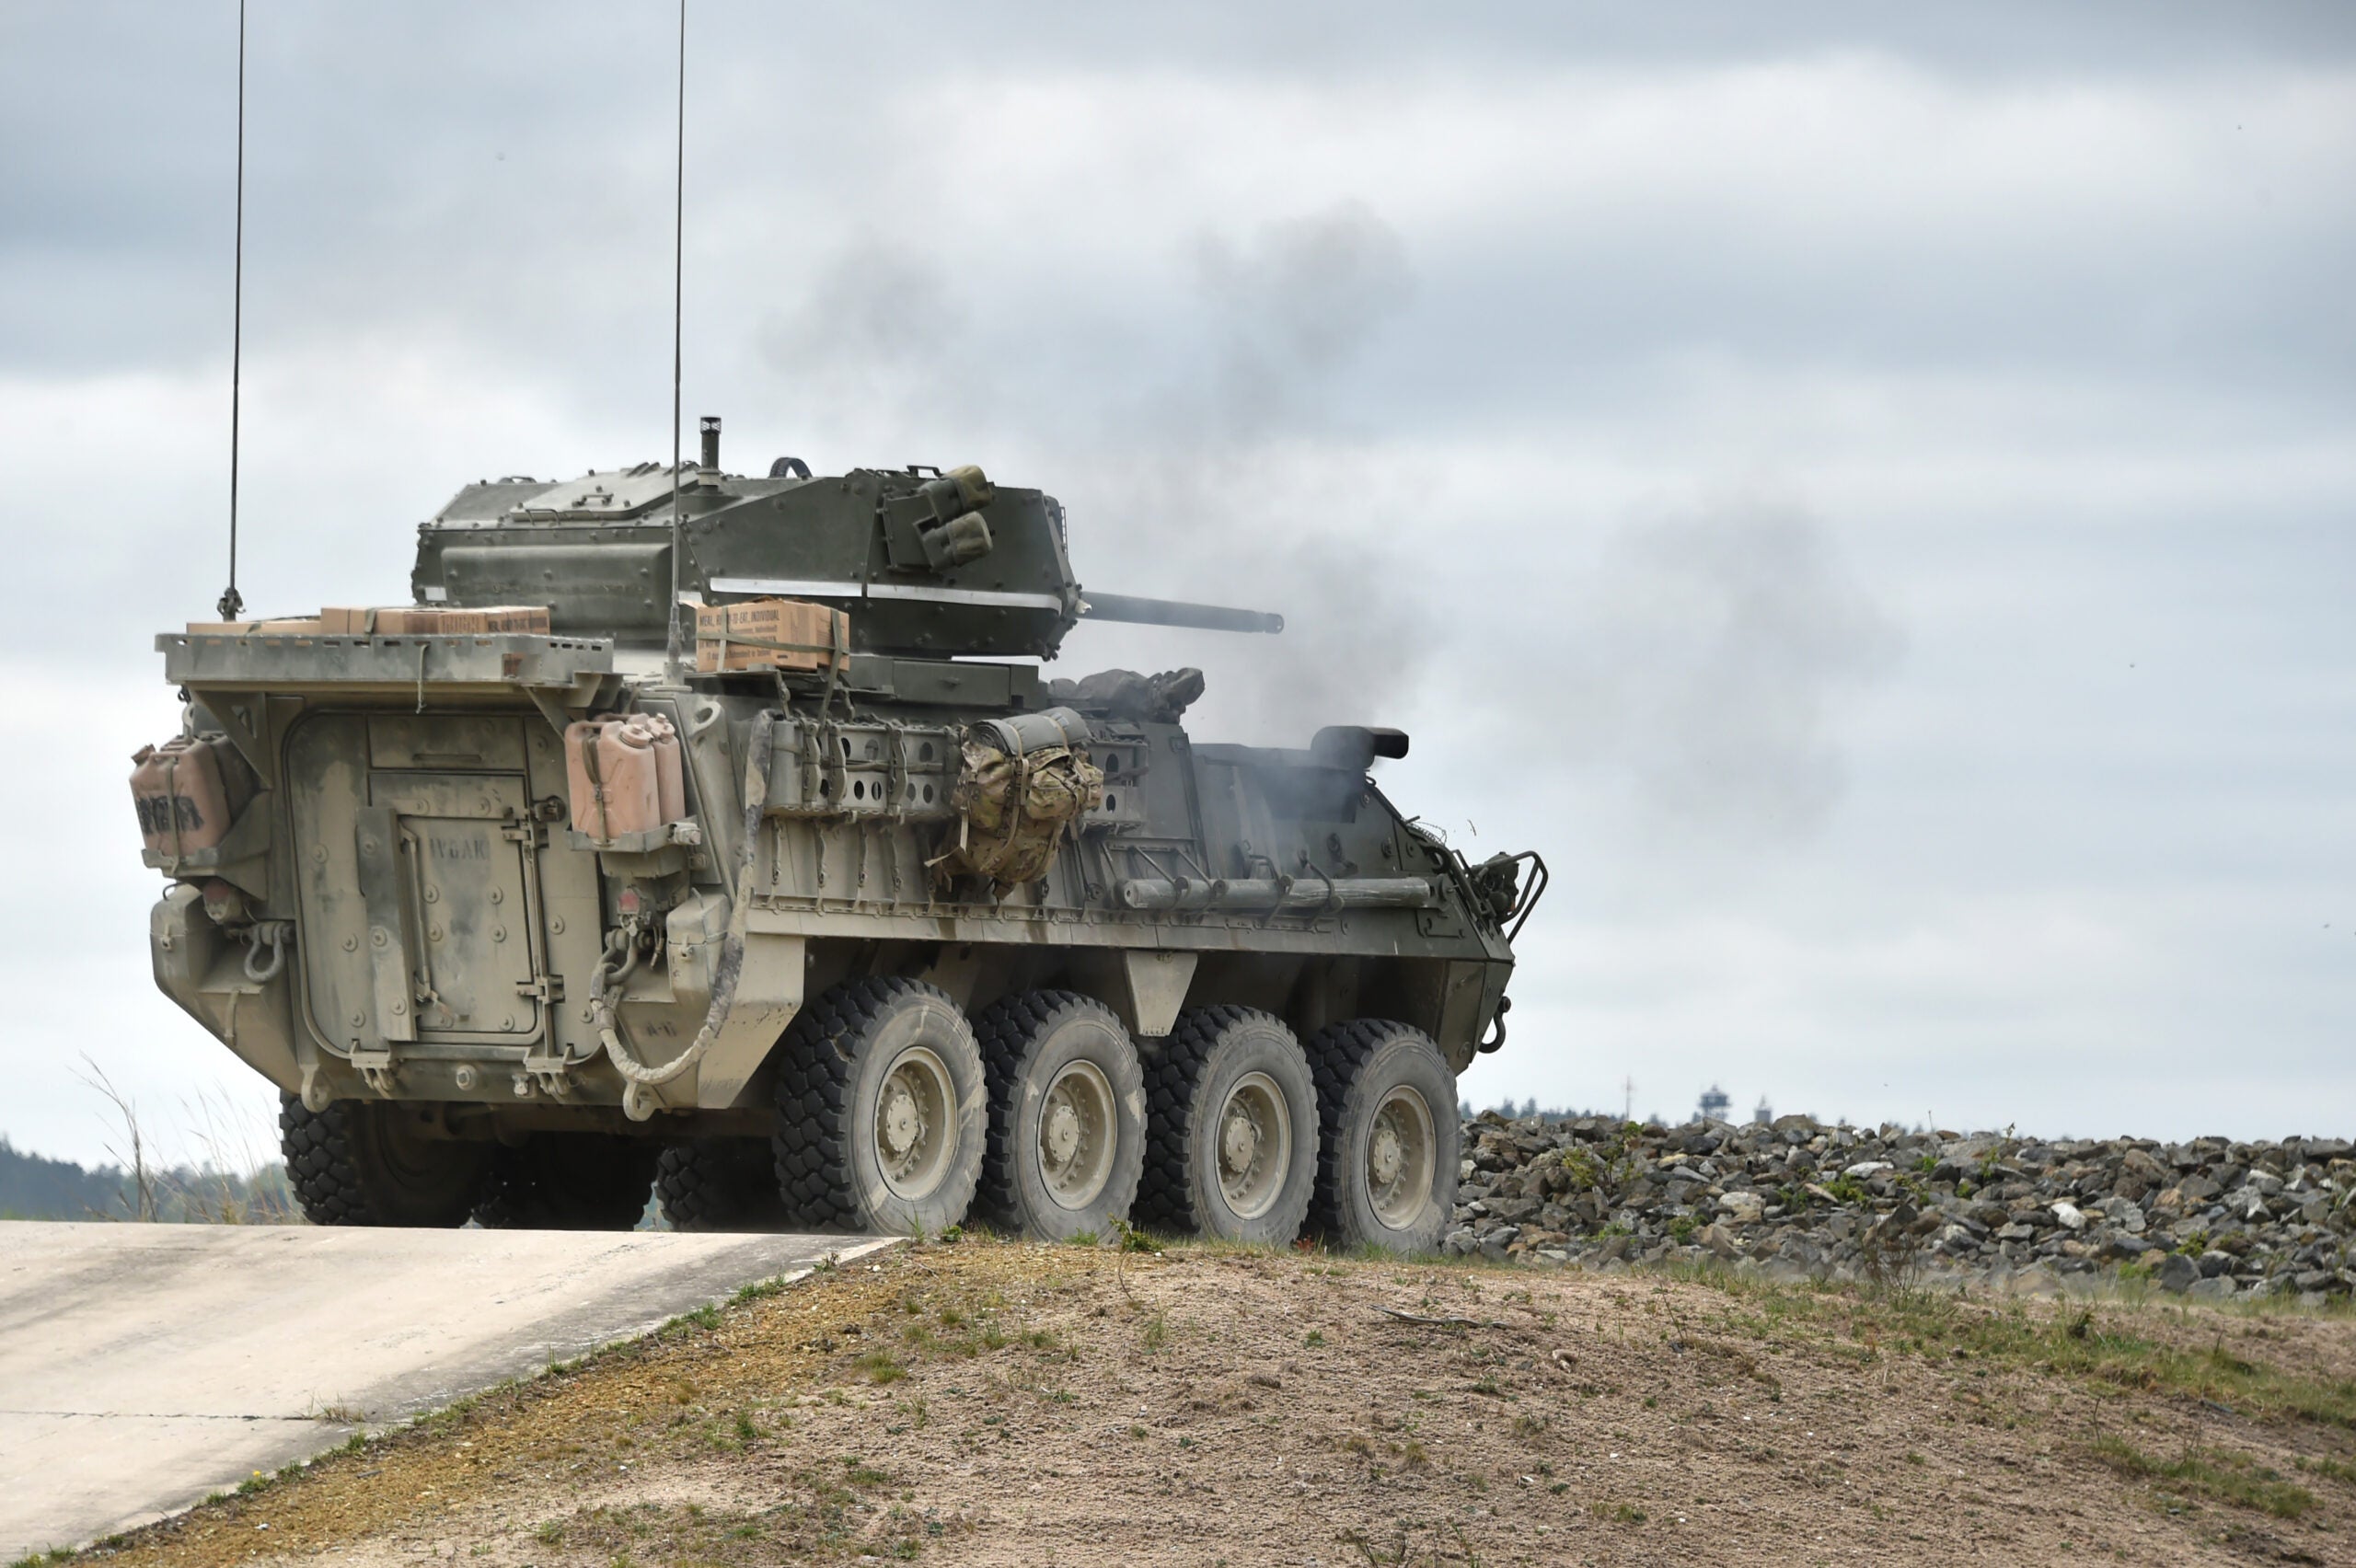 A U. S. Army Stryker Infantry Carrier Vehicle-Dragoon crew with Apache Troop, 1st Squadron, 2d Cavalry Regiment fire the Medium Caliber Turret-30mm weapons system during the squadrons Stryker crew gunnery at the 7th Army Training Command’s Grafenwoehr Training Area, Germany, April 26, 2019. The purpose of the Stryker gunnery is to qualify the gunners as part of a Stryker Infantry Carrier Vehicle crew on their assigned weapon system and build confidence. This qualification is required for 1/2CR’s participation in exercise Saber Guardian 19 in Hungary and Romania scheduled for later this year. (U.S. Army photo by Gertrud Zach)